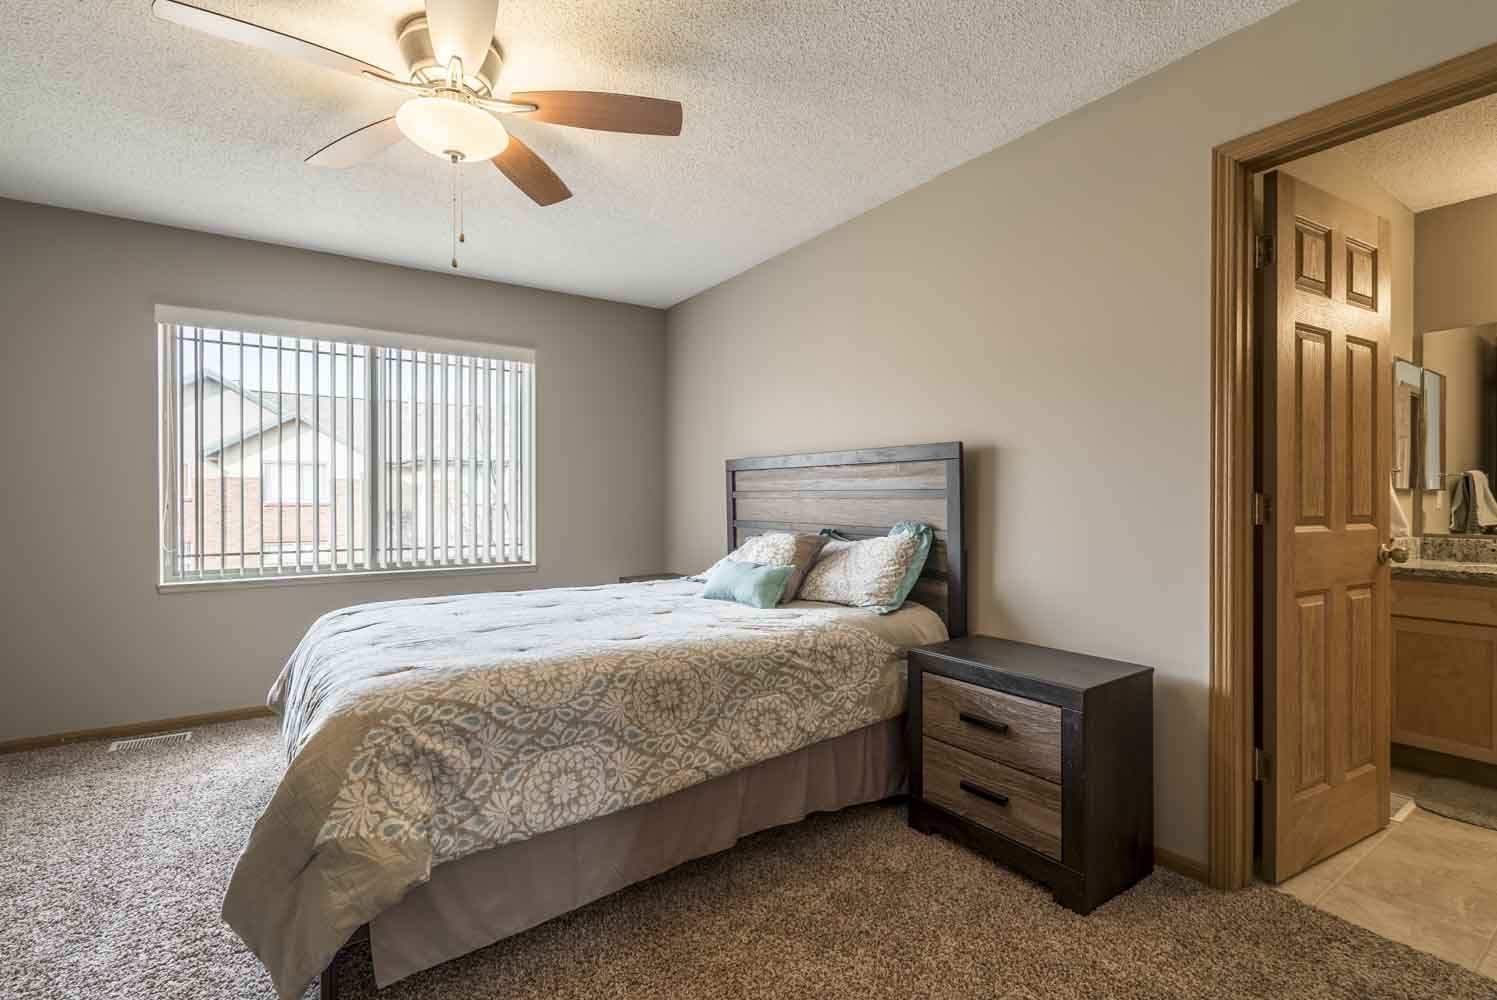 Master bedroom with attached bathroom and ceiling fan at Southwind Villas in southwest Omaha in La Vista, NE, 68128